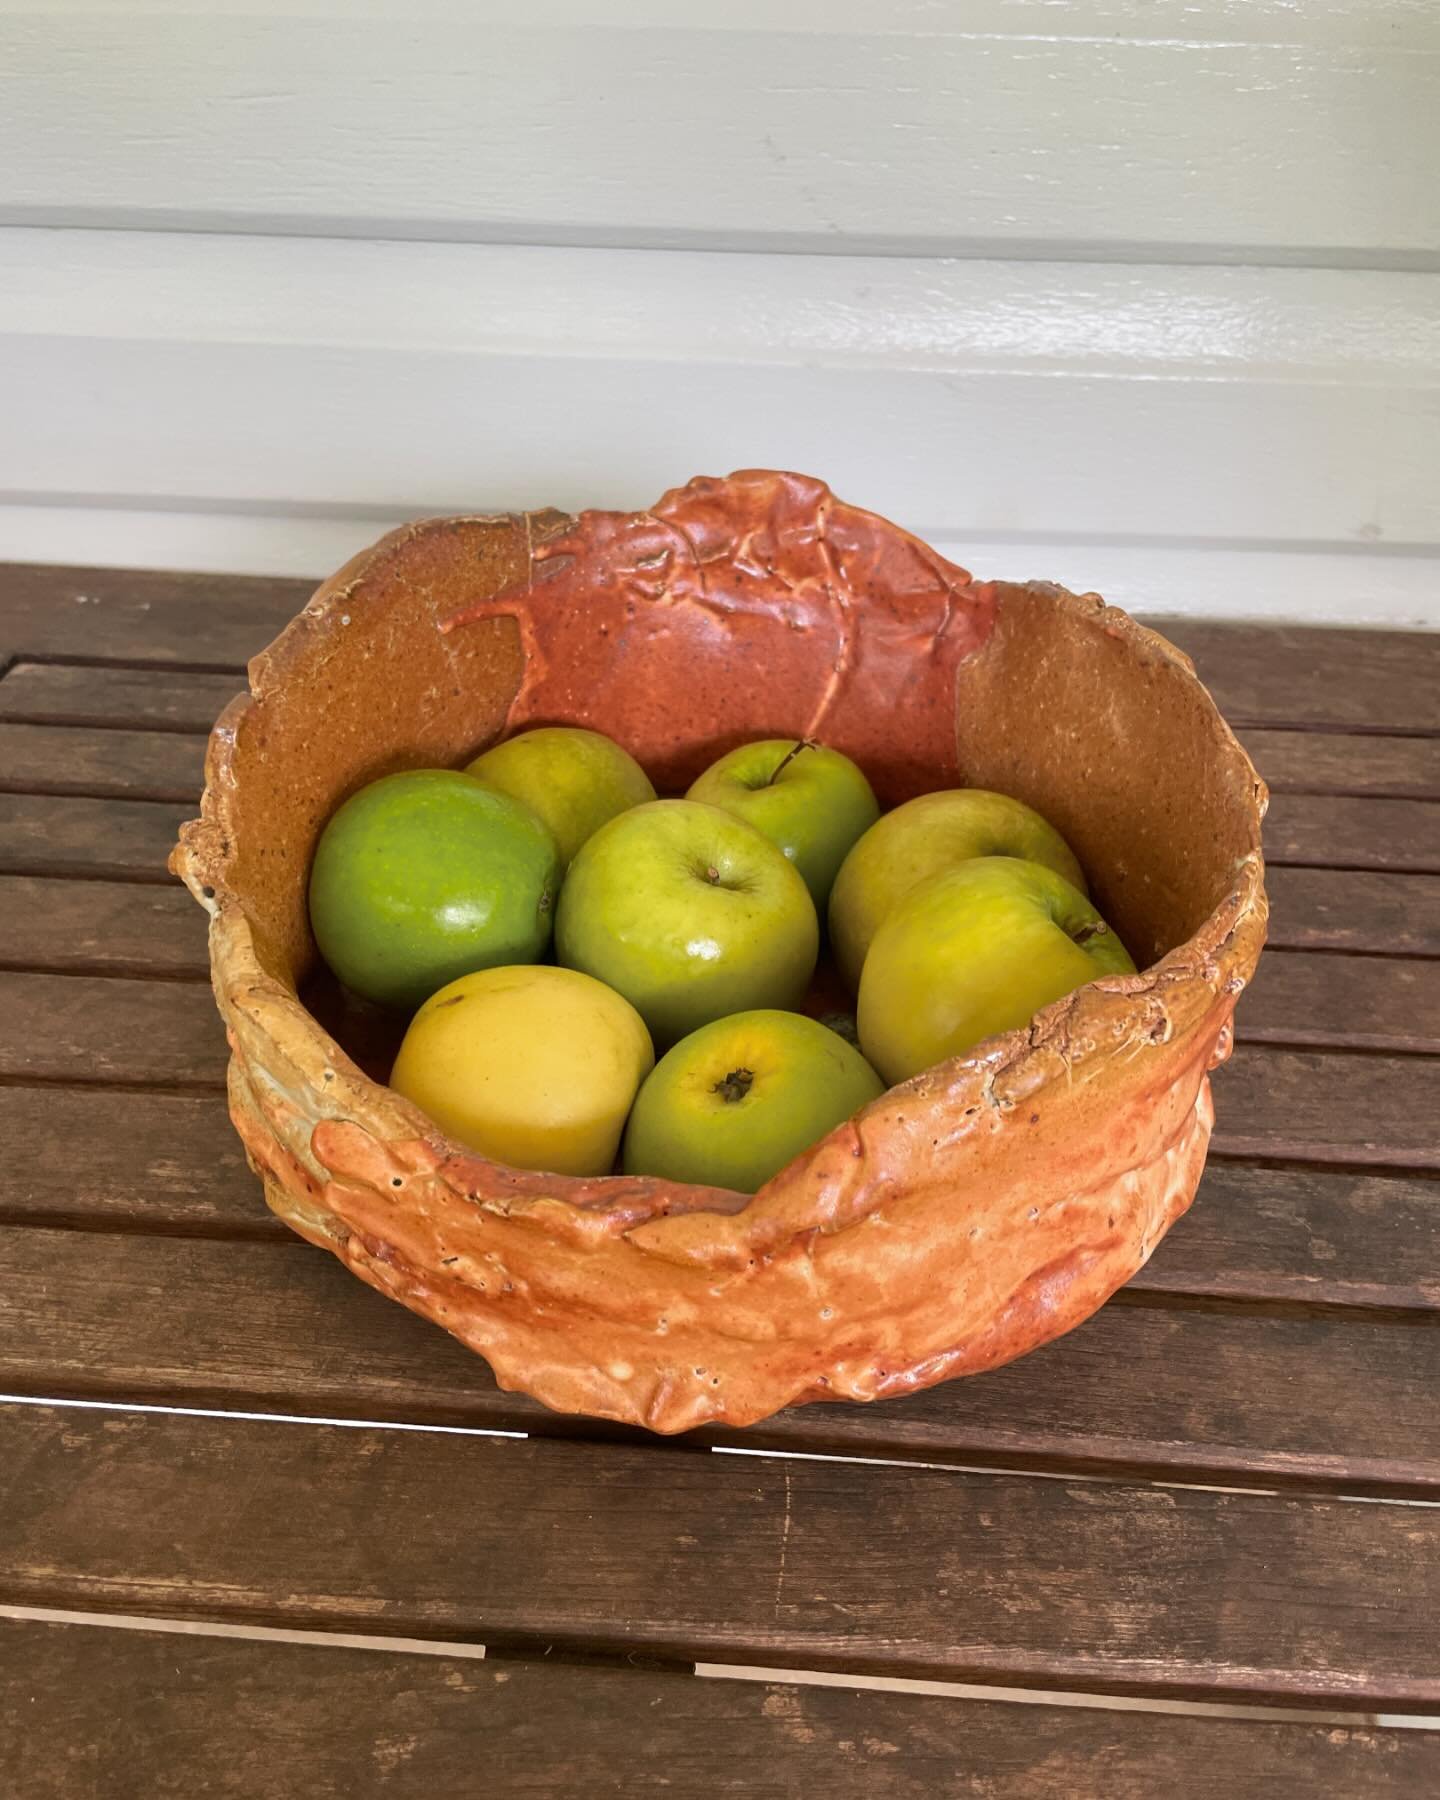 Revisited a smaller landscape platter @sturtgalleryandstudios to find it serving great purpose of holding fruit. So heartwarming to see these pieces in use 
.
#handmade #terroir #woodfired  #landscapeplatter #australianceramics  #keramic #womenwhowoo